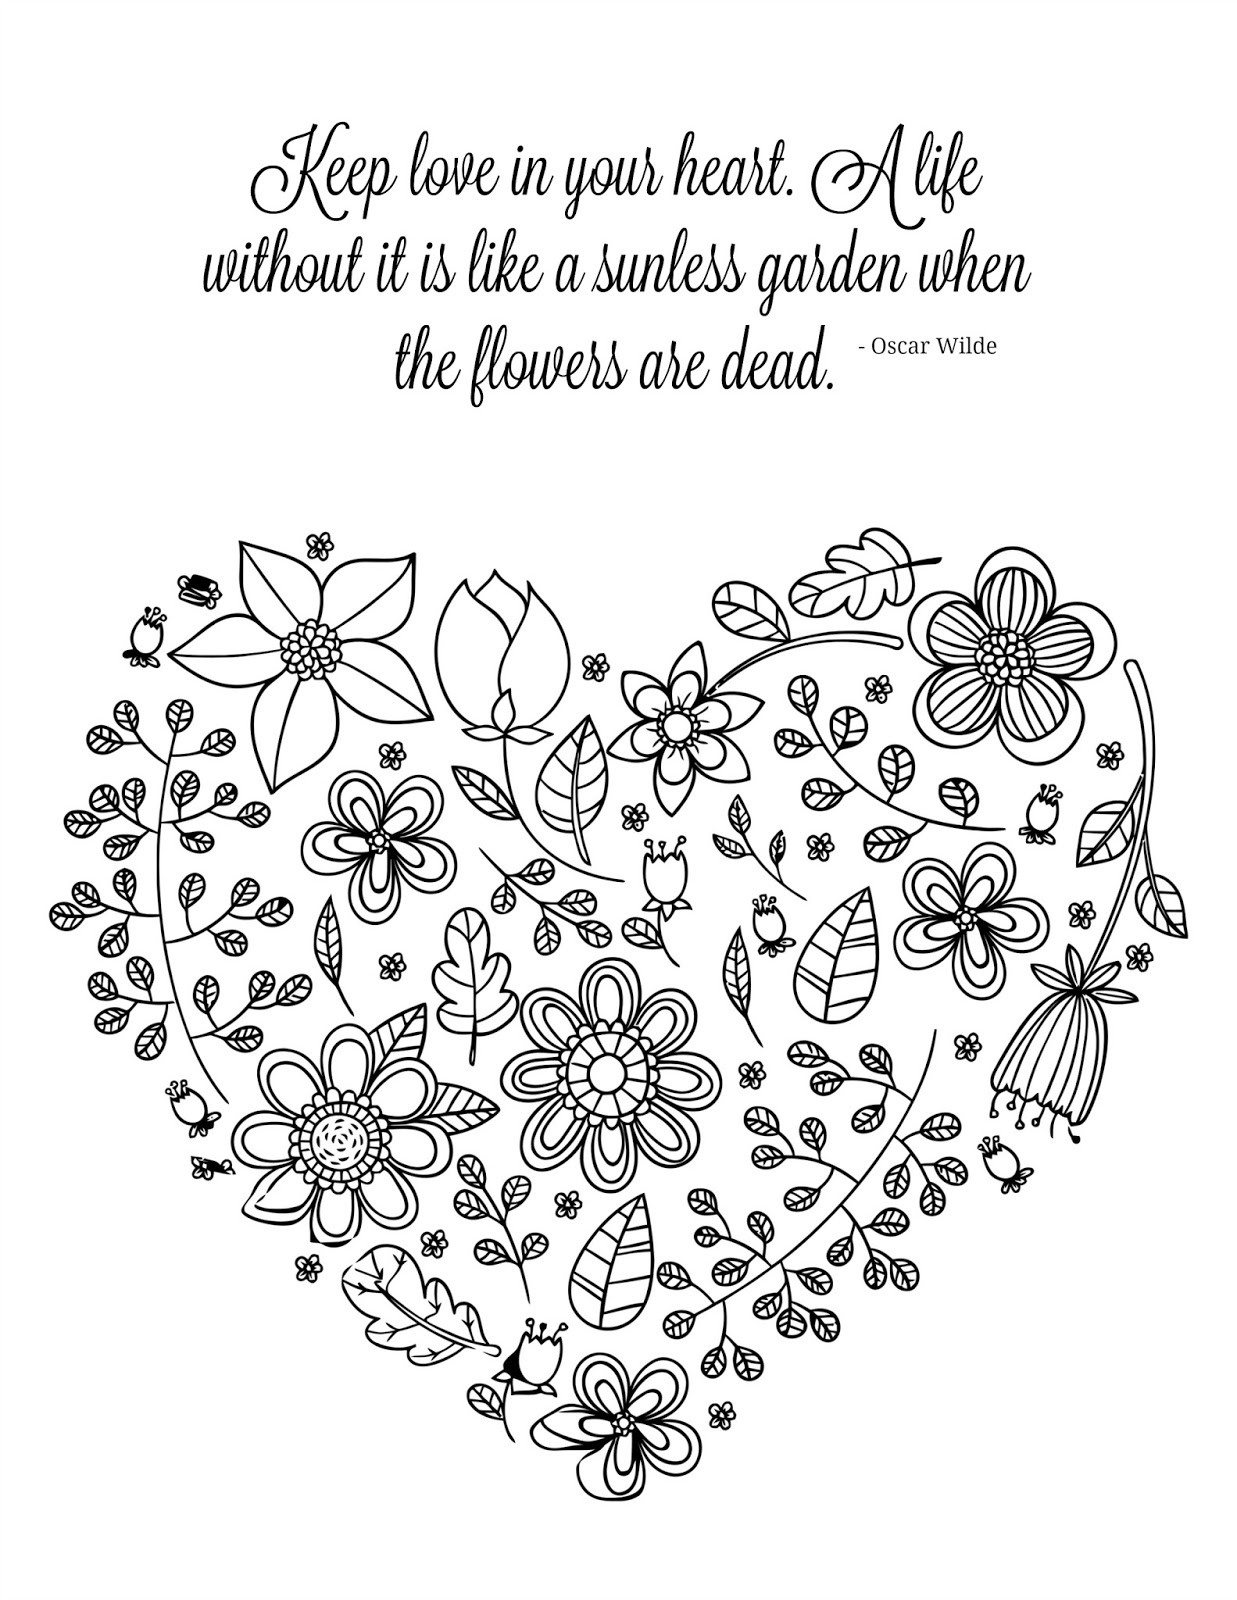 cjo photo inspirational coloring page keep love in your heart quote